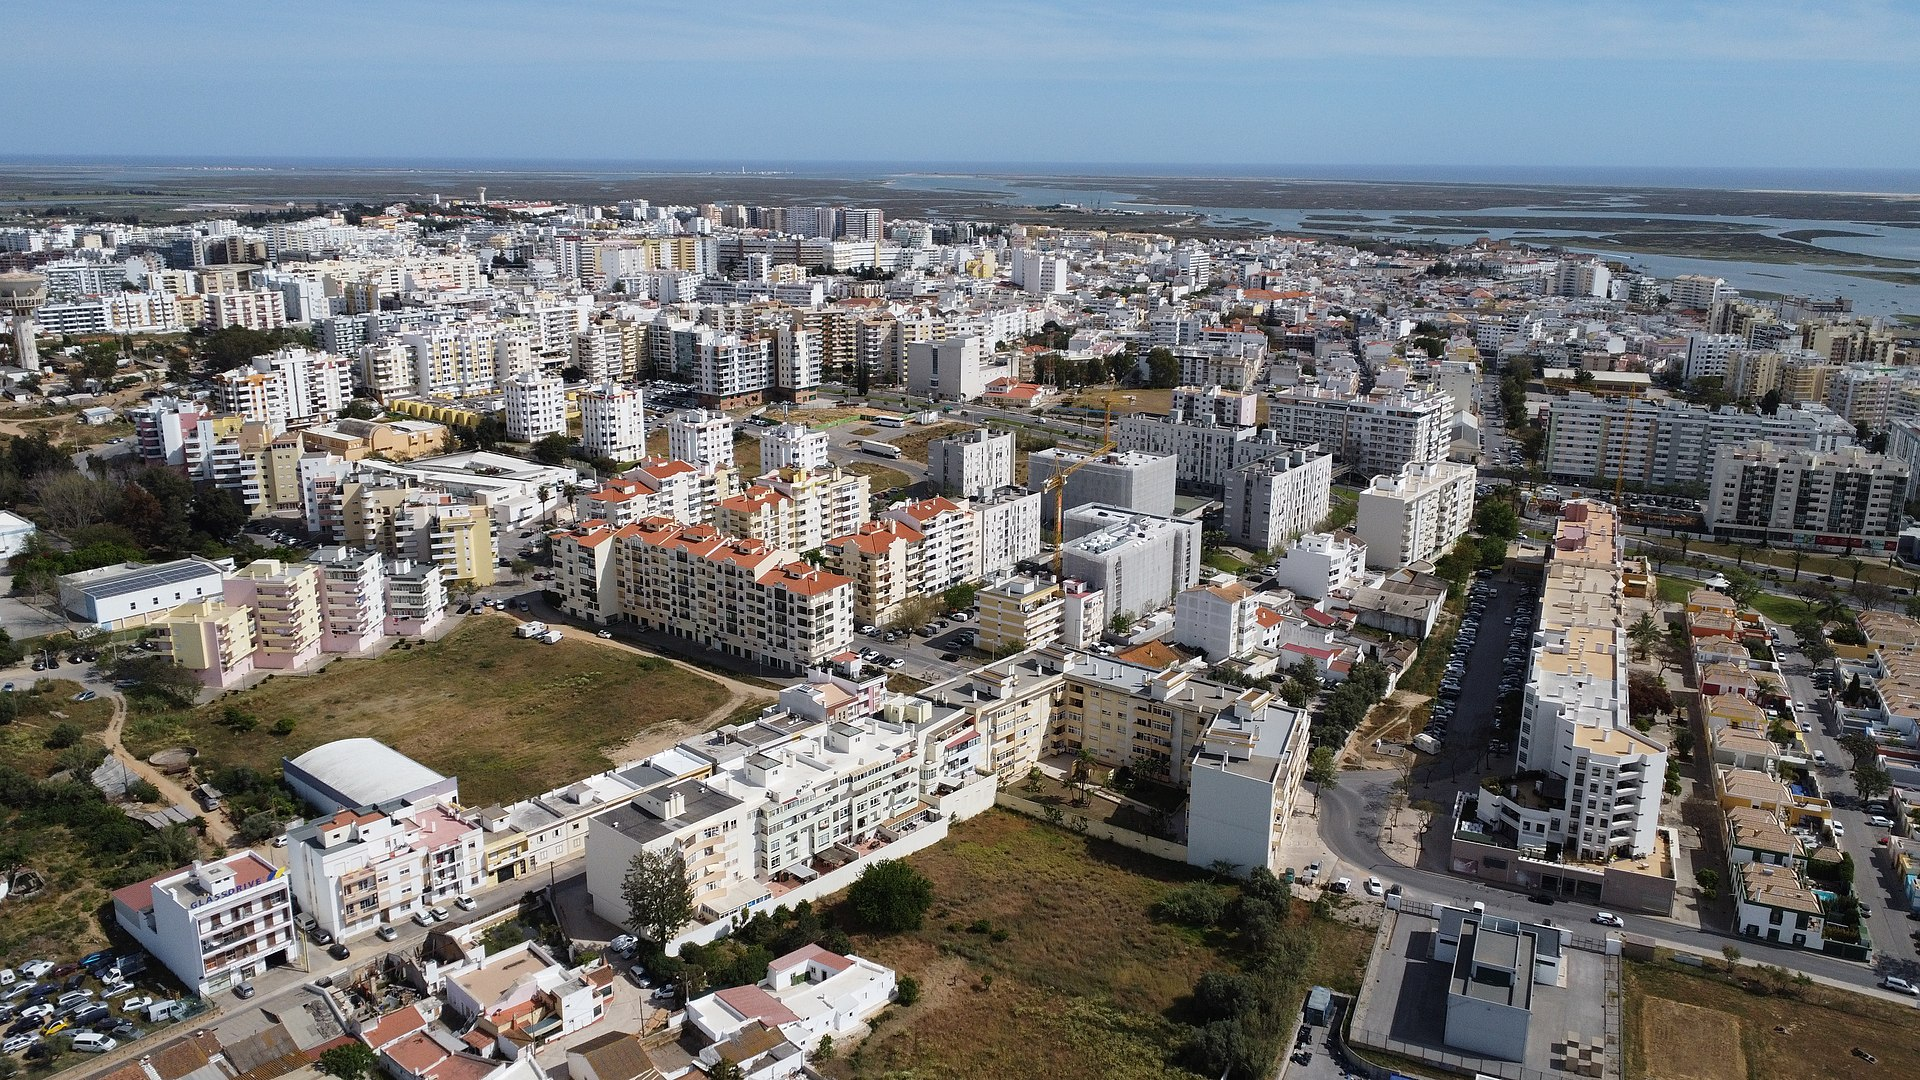 An aerial view of Faro, Portugal